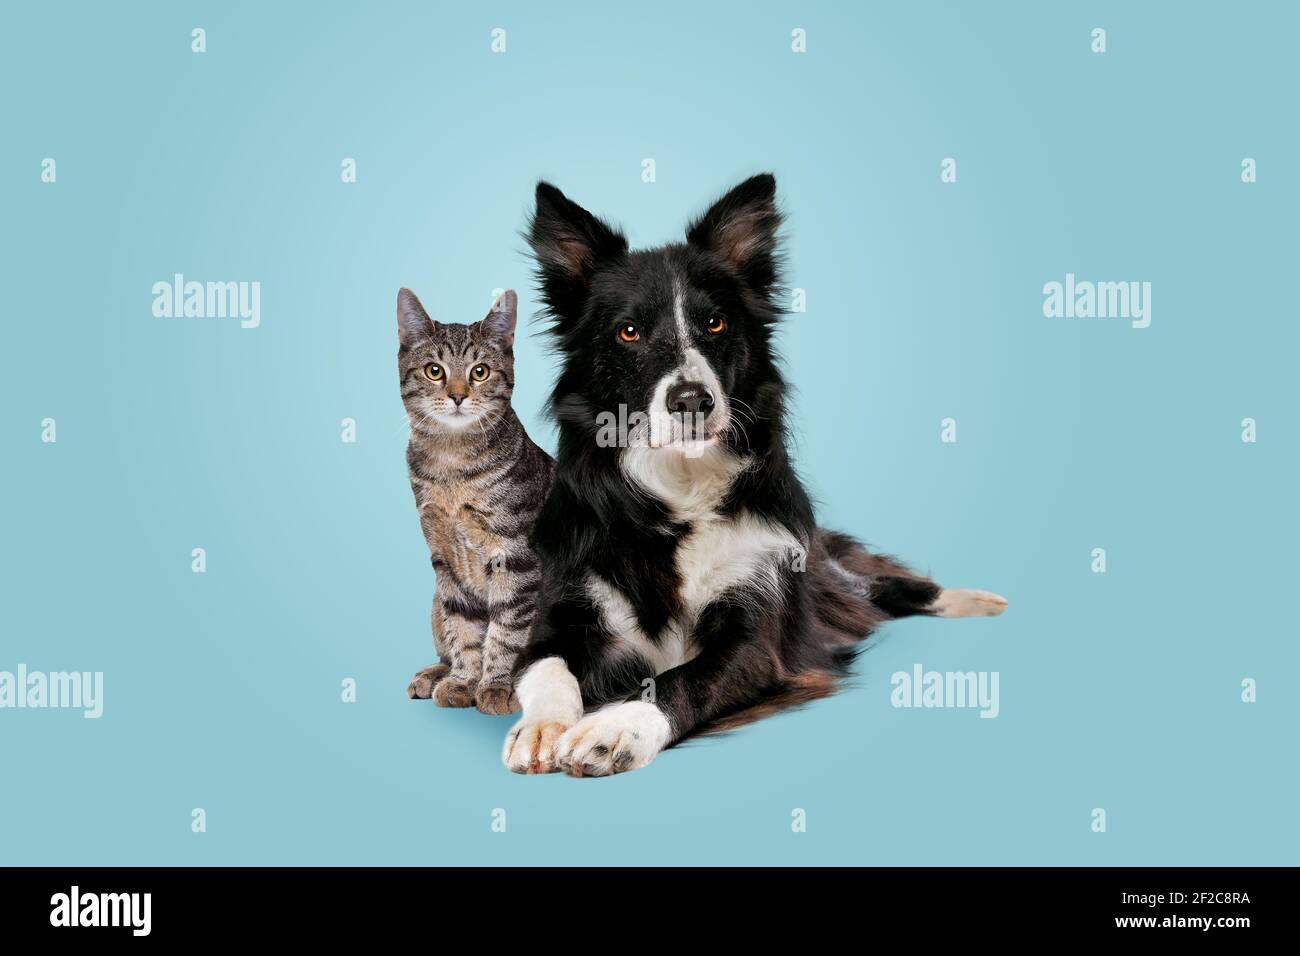 tabby cat and border collie dog in front of a blue gradient background Stock Photo